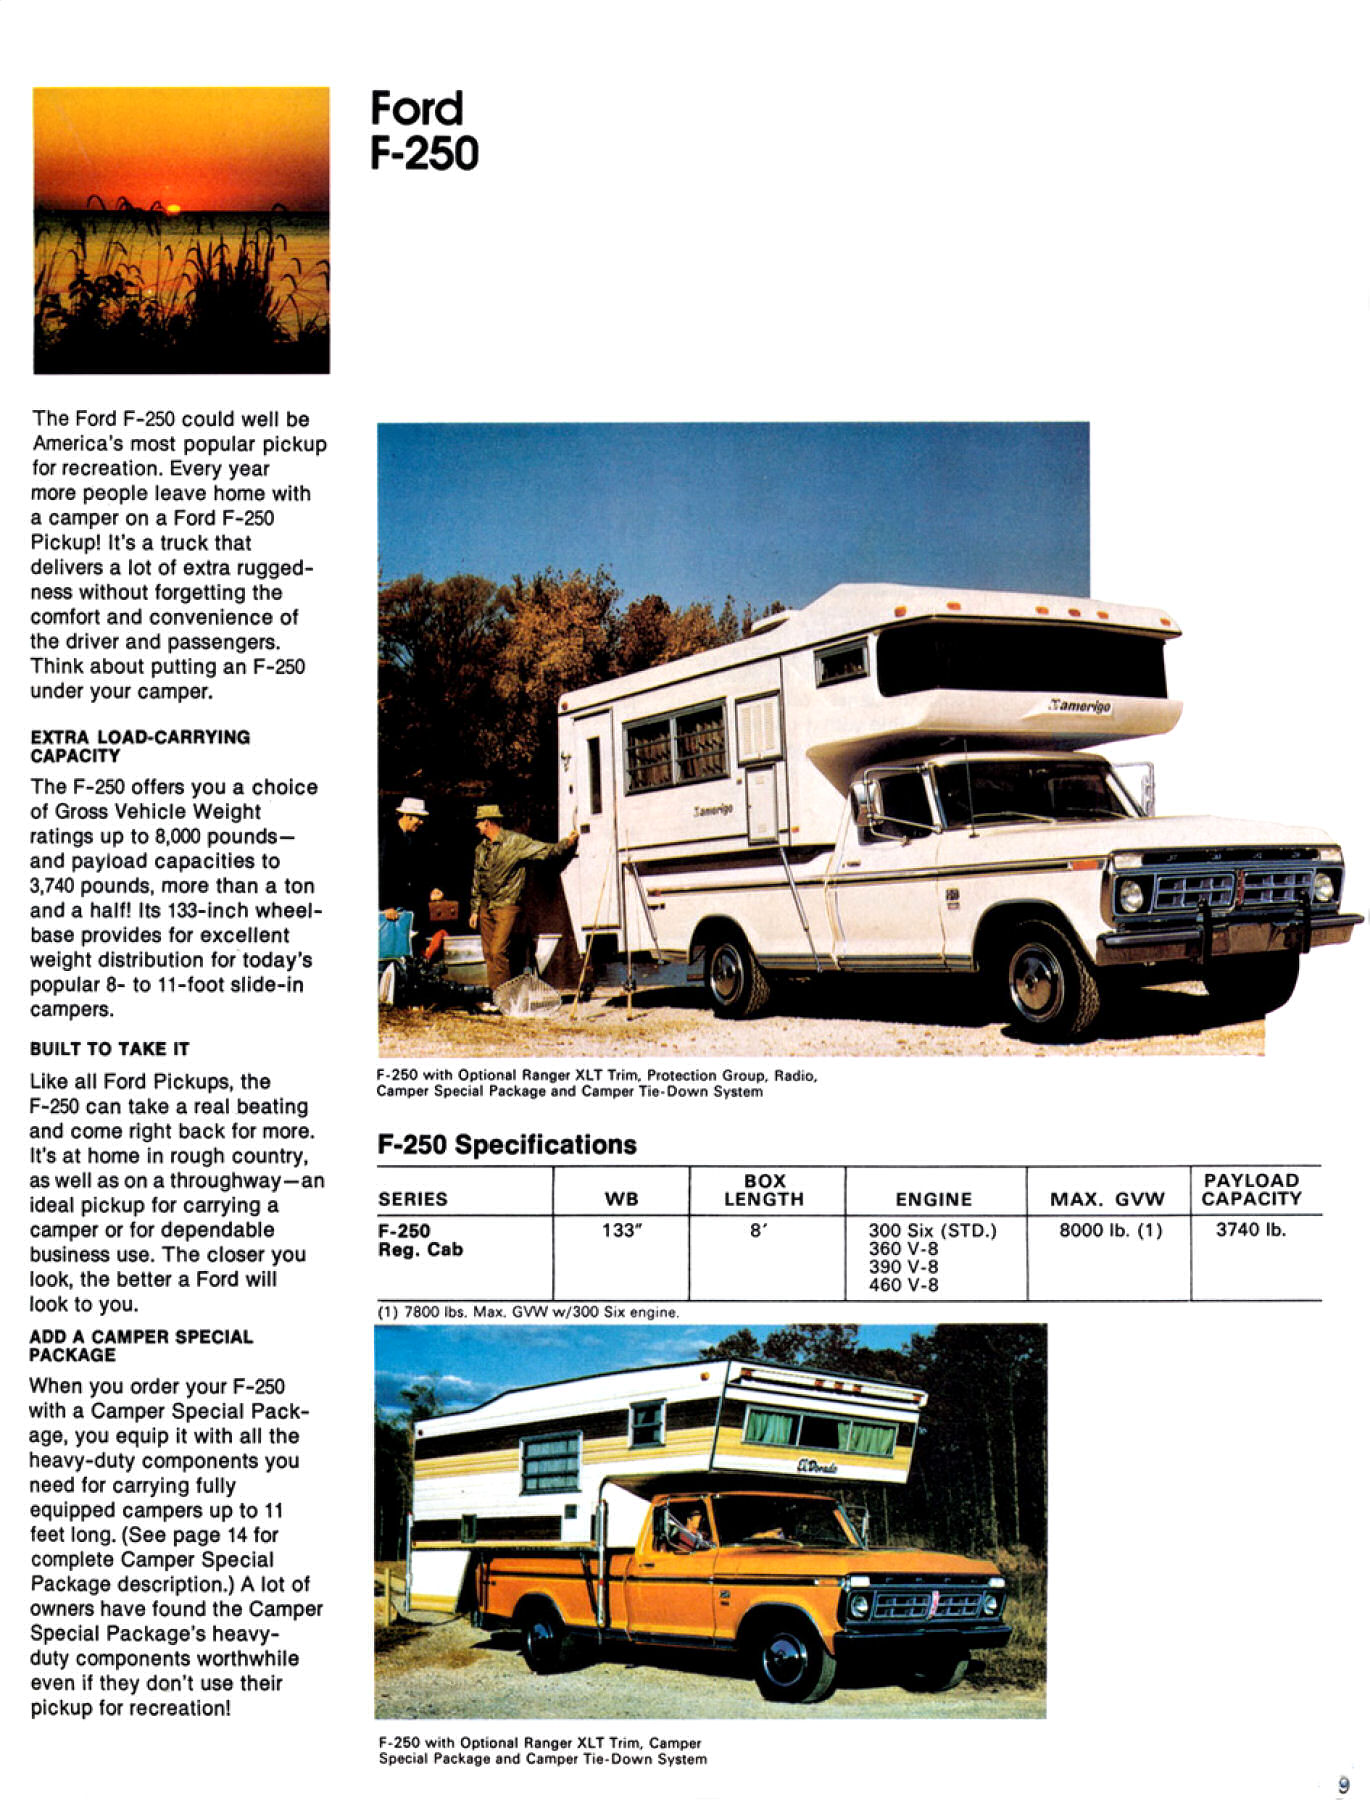 1976 Ford Recreation Vehicles-09